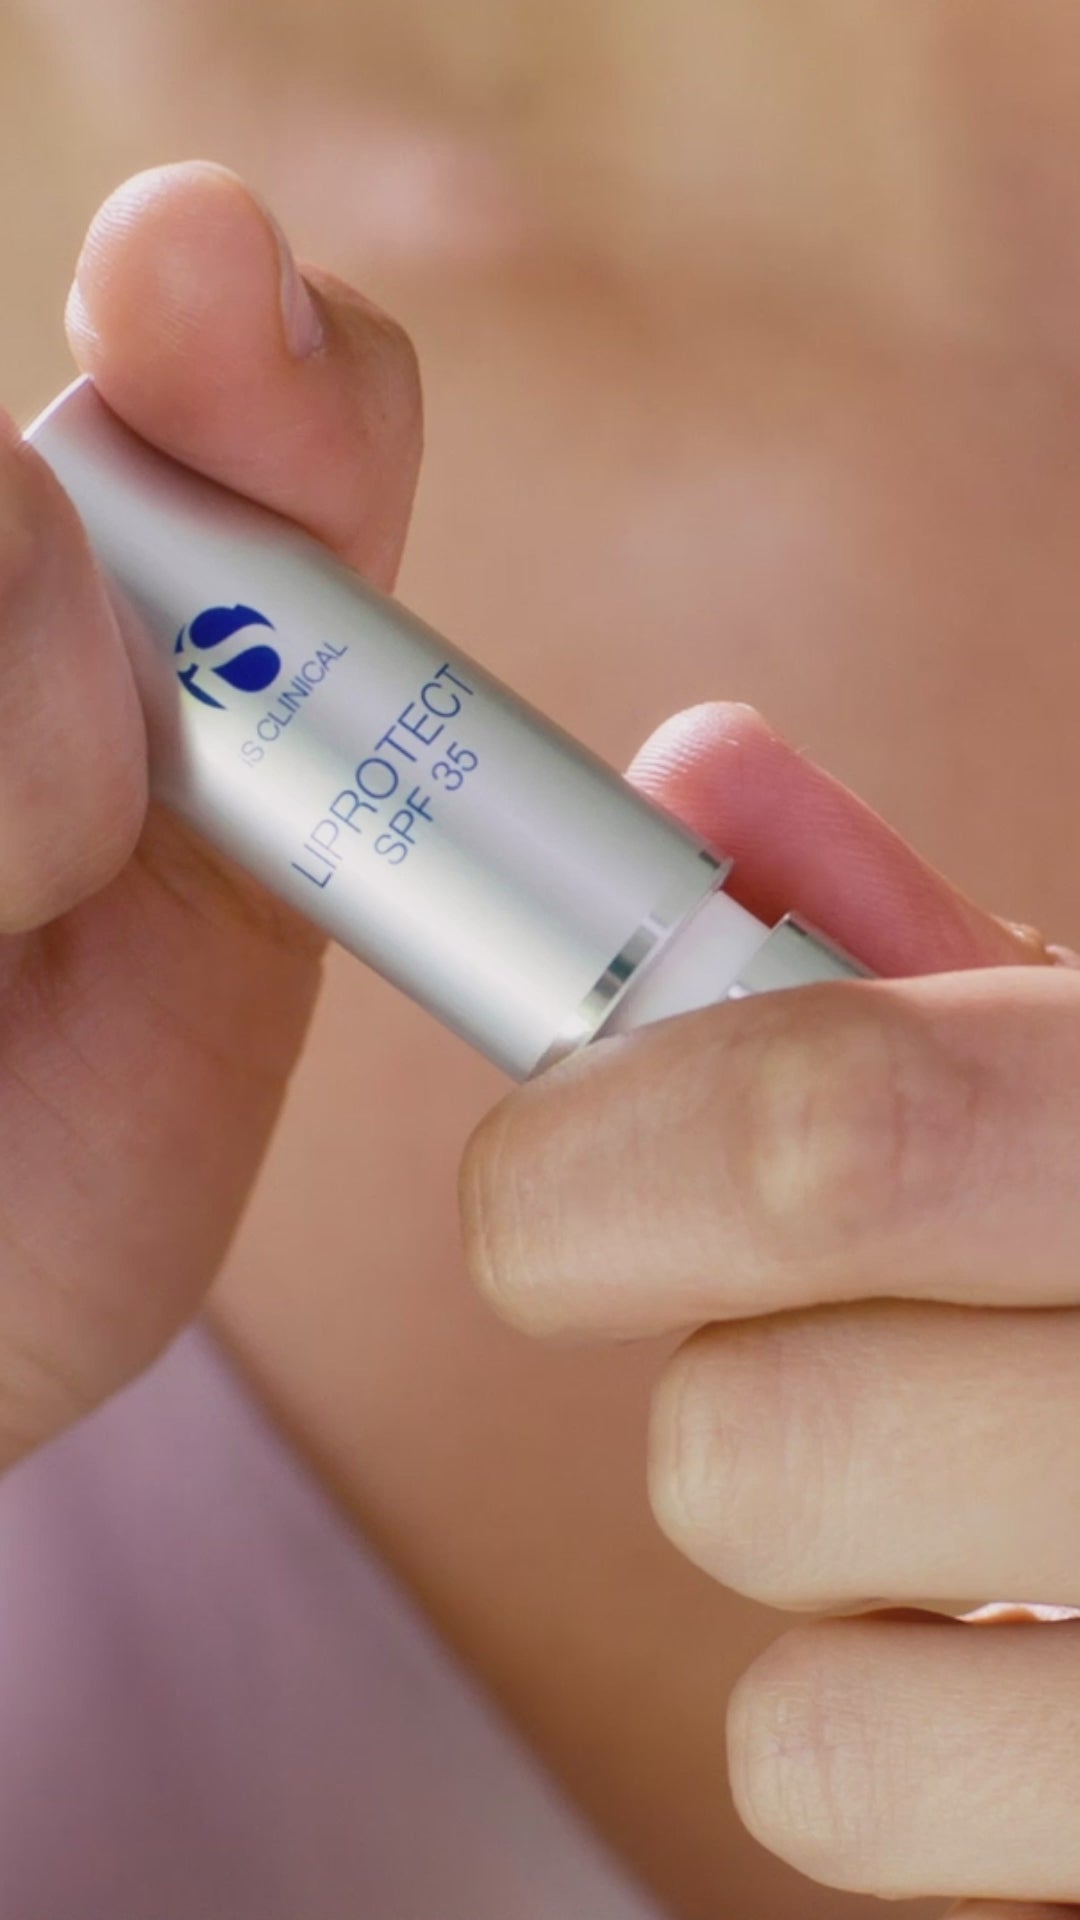 iS Clinical LIProtect SPF 35 (0.17 ອໍ)